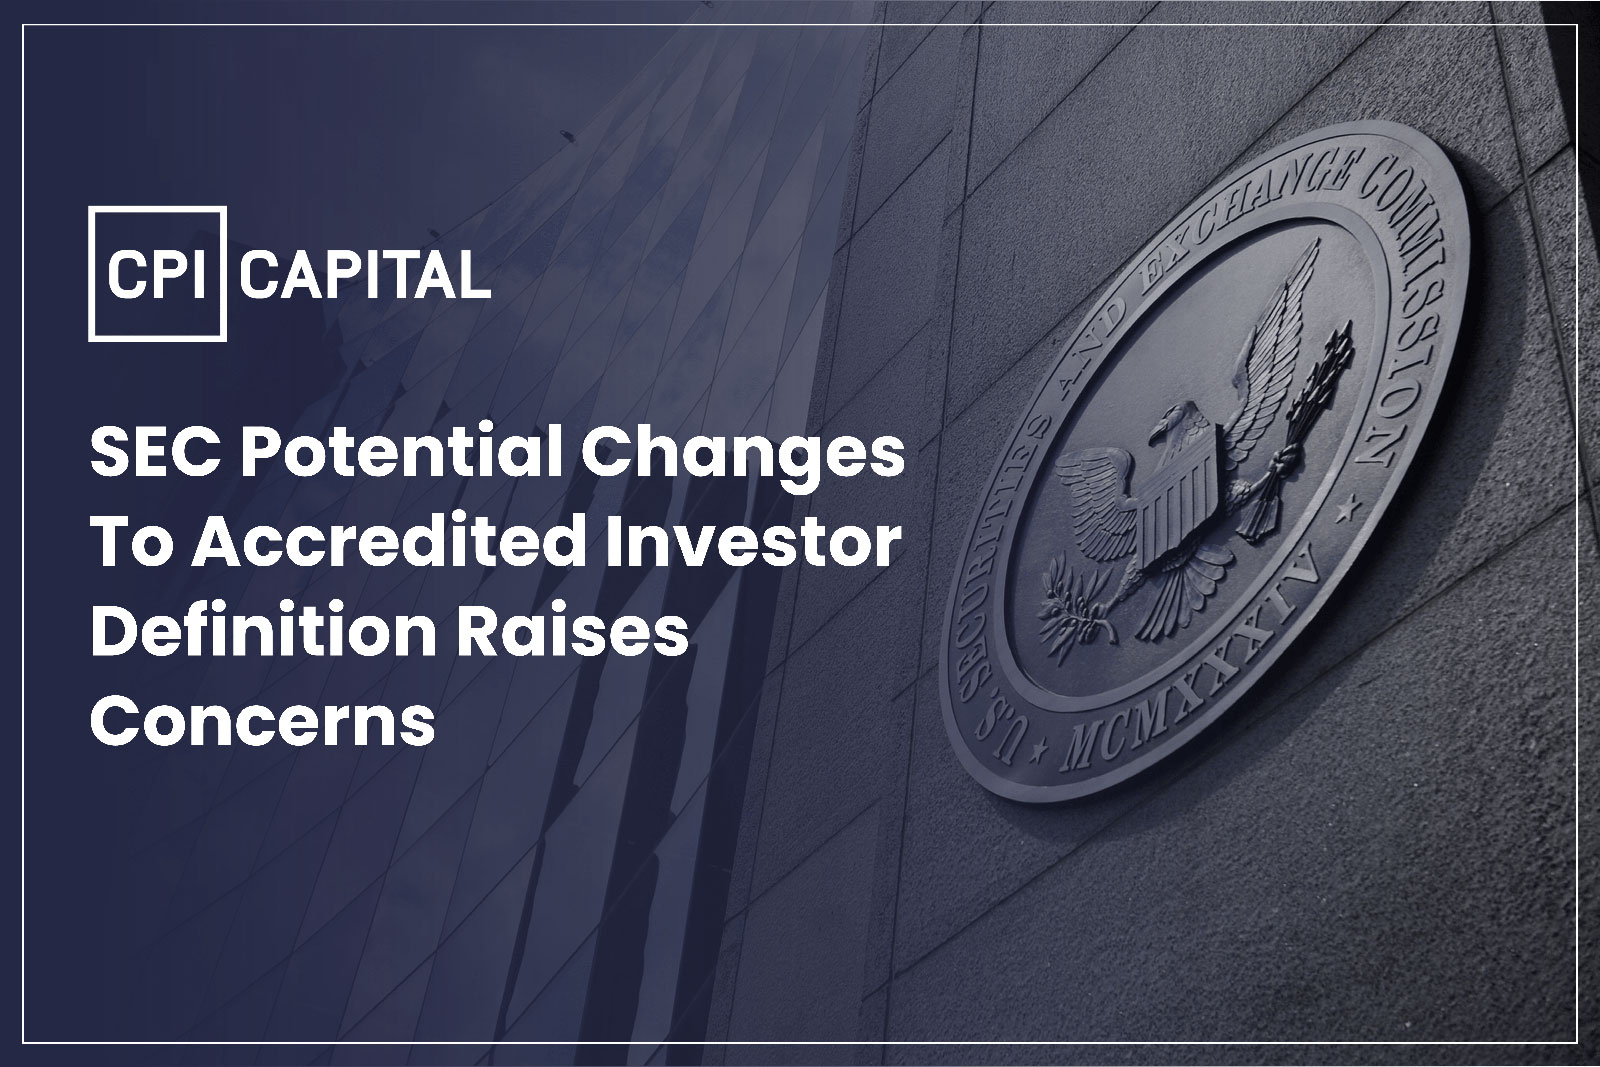 SEC Potential changes to Accredited Investor definition raises concerns